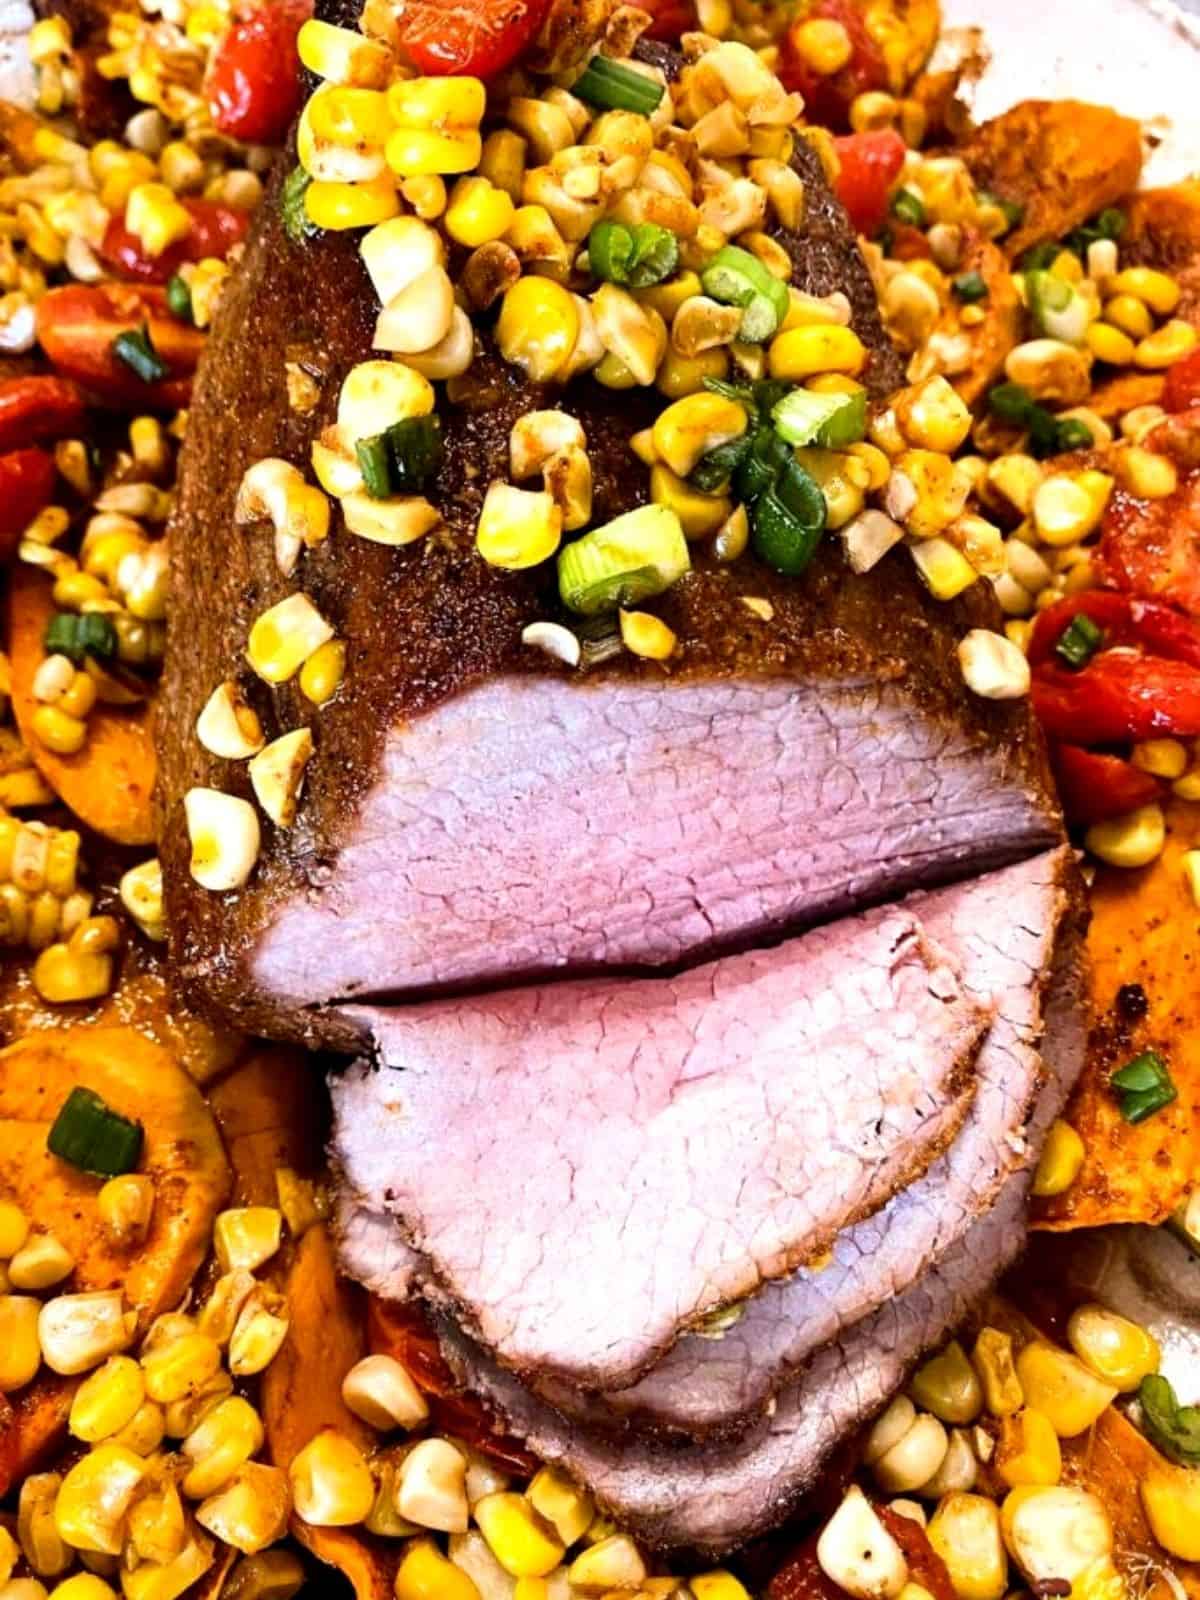 Eye of round roast with corn and grape tomatoes